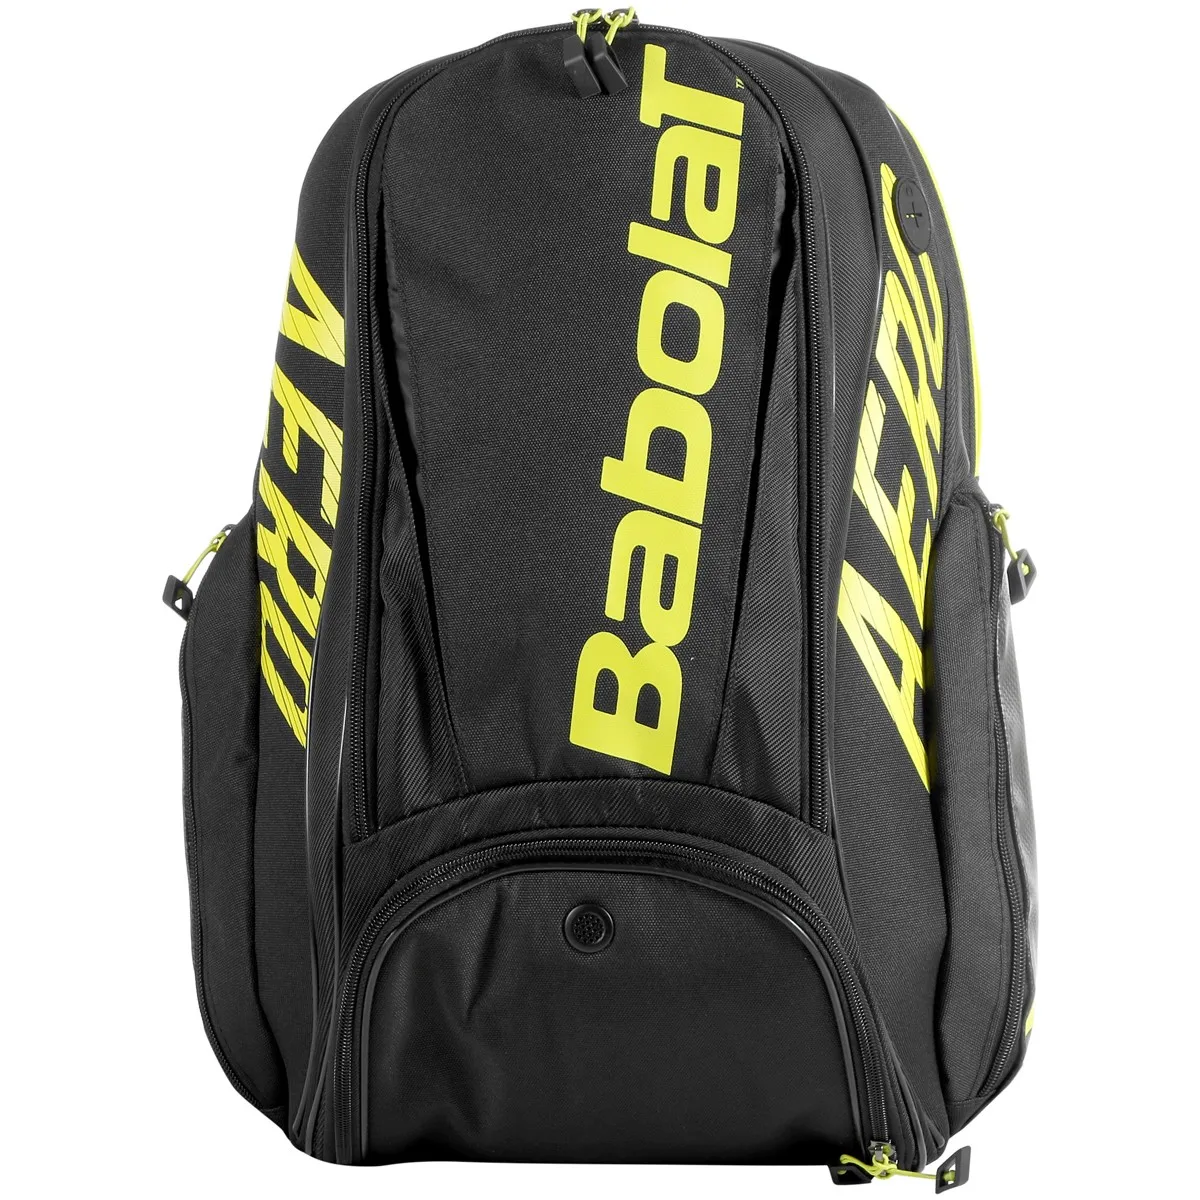 

2021 New PURE AERO Backpack Nadal Limited Edition Tennis Bag Multifunctional Sports Bag Badminton Training Backpack